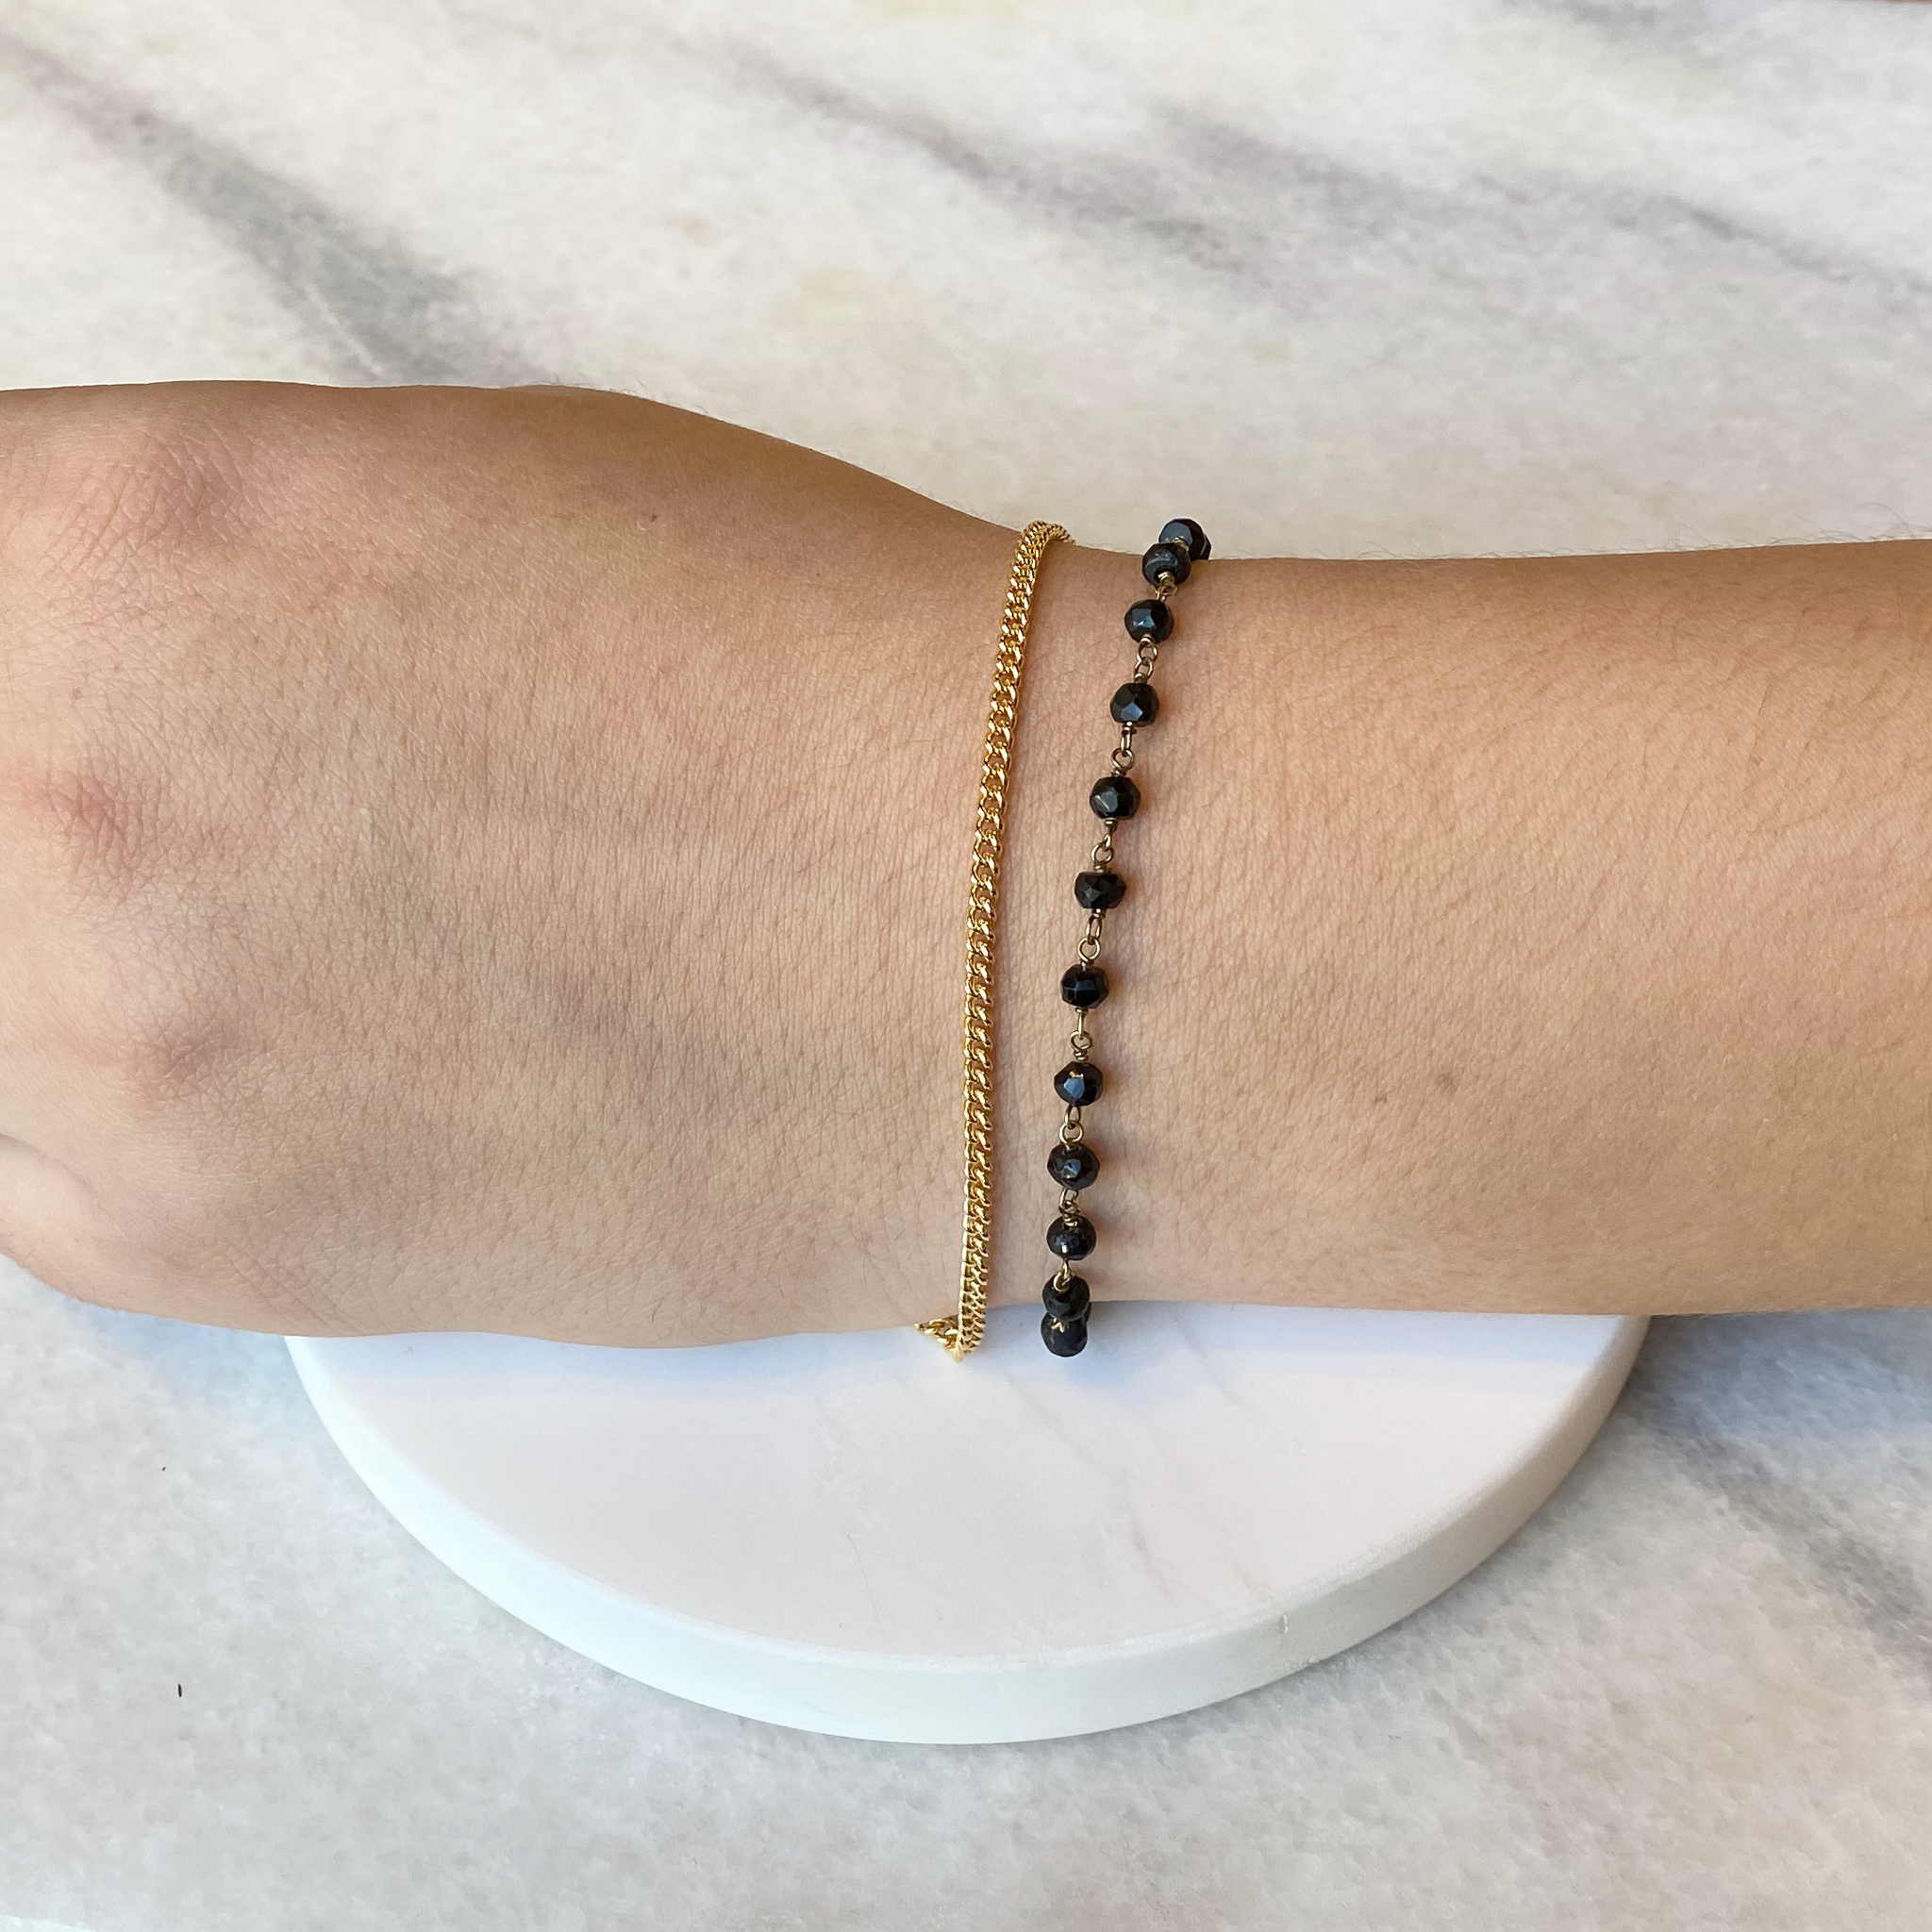 Permanent Forever Bracelets - Book Now - Alexandra Marks Jewelry Chicago -  Go Viral!